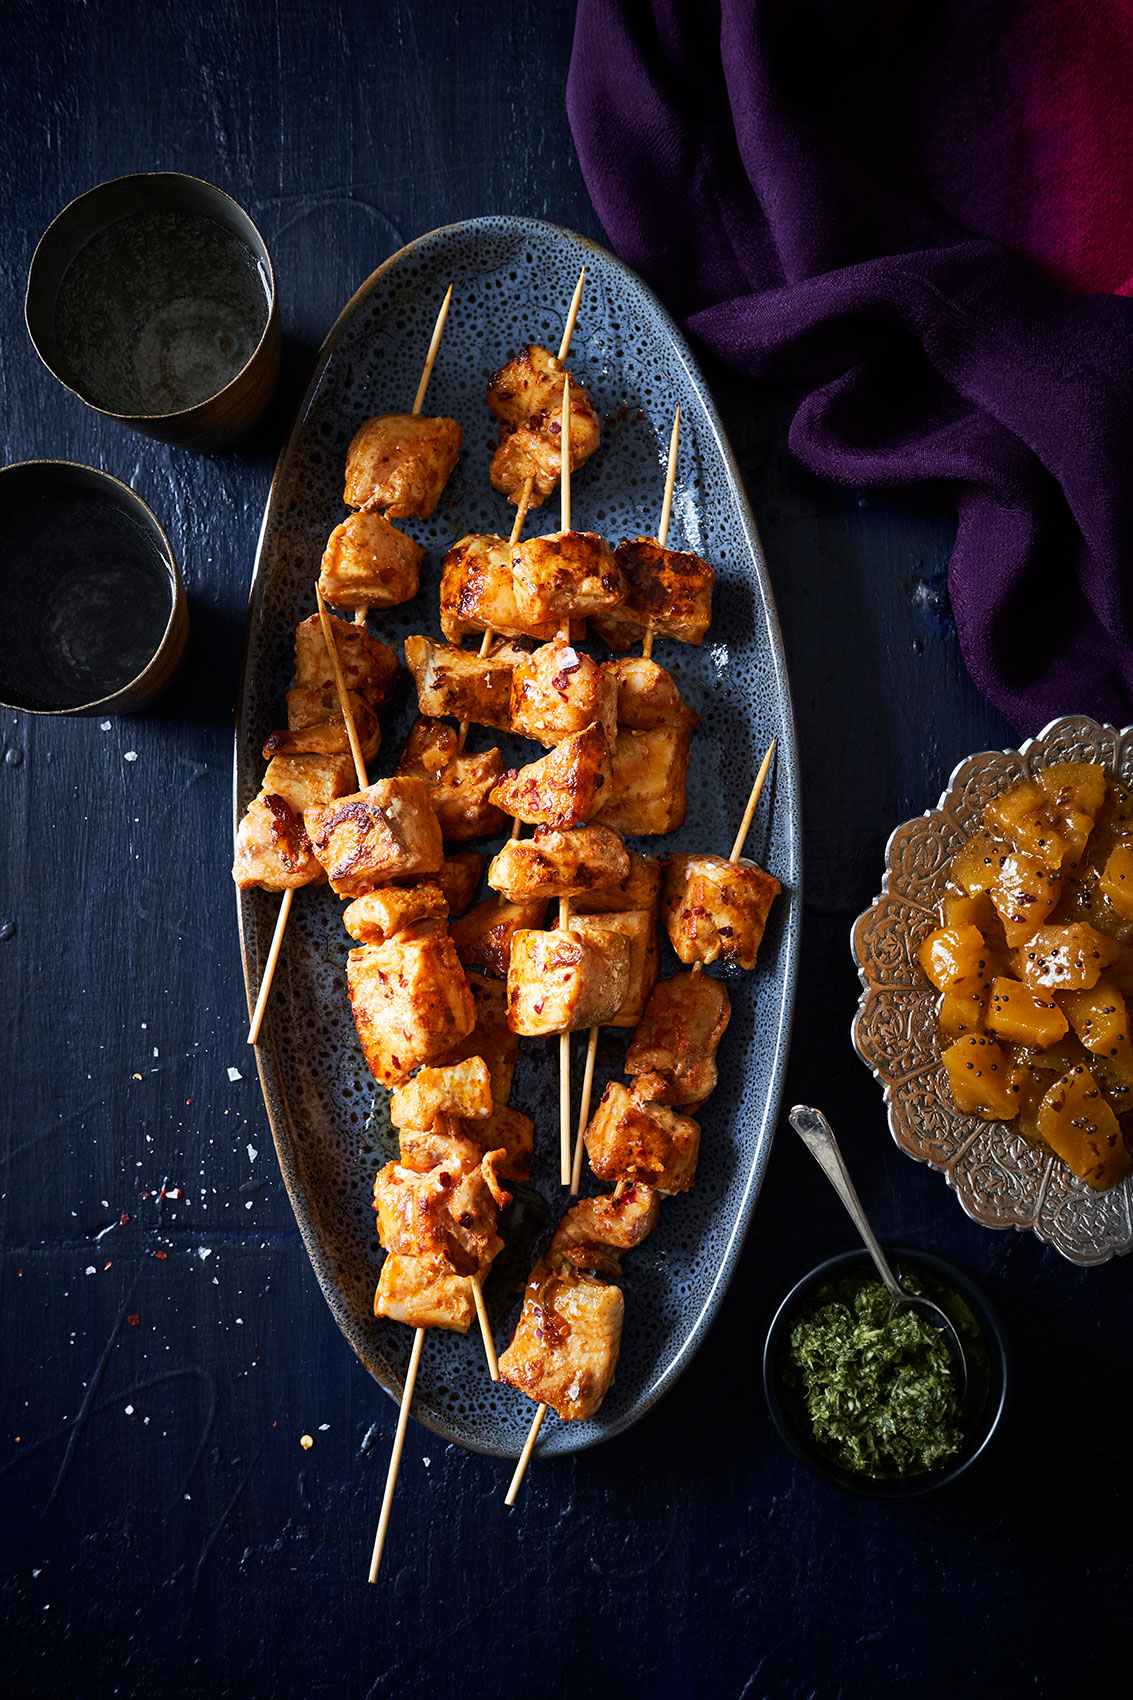 My Indian Kitchen • Fish Tikka Skewers with Chilli & Coriander • Cookbook & Editorial Food Photography